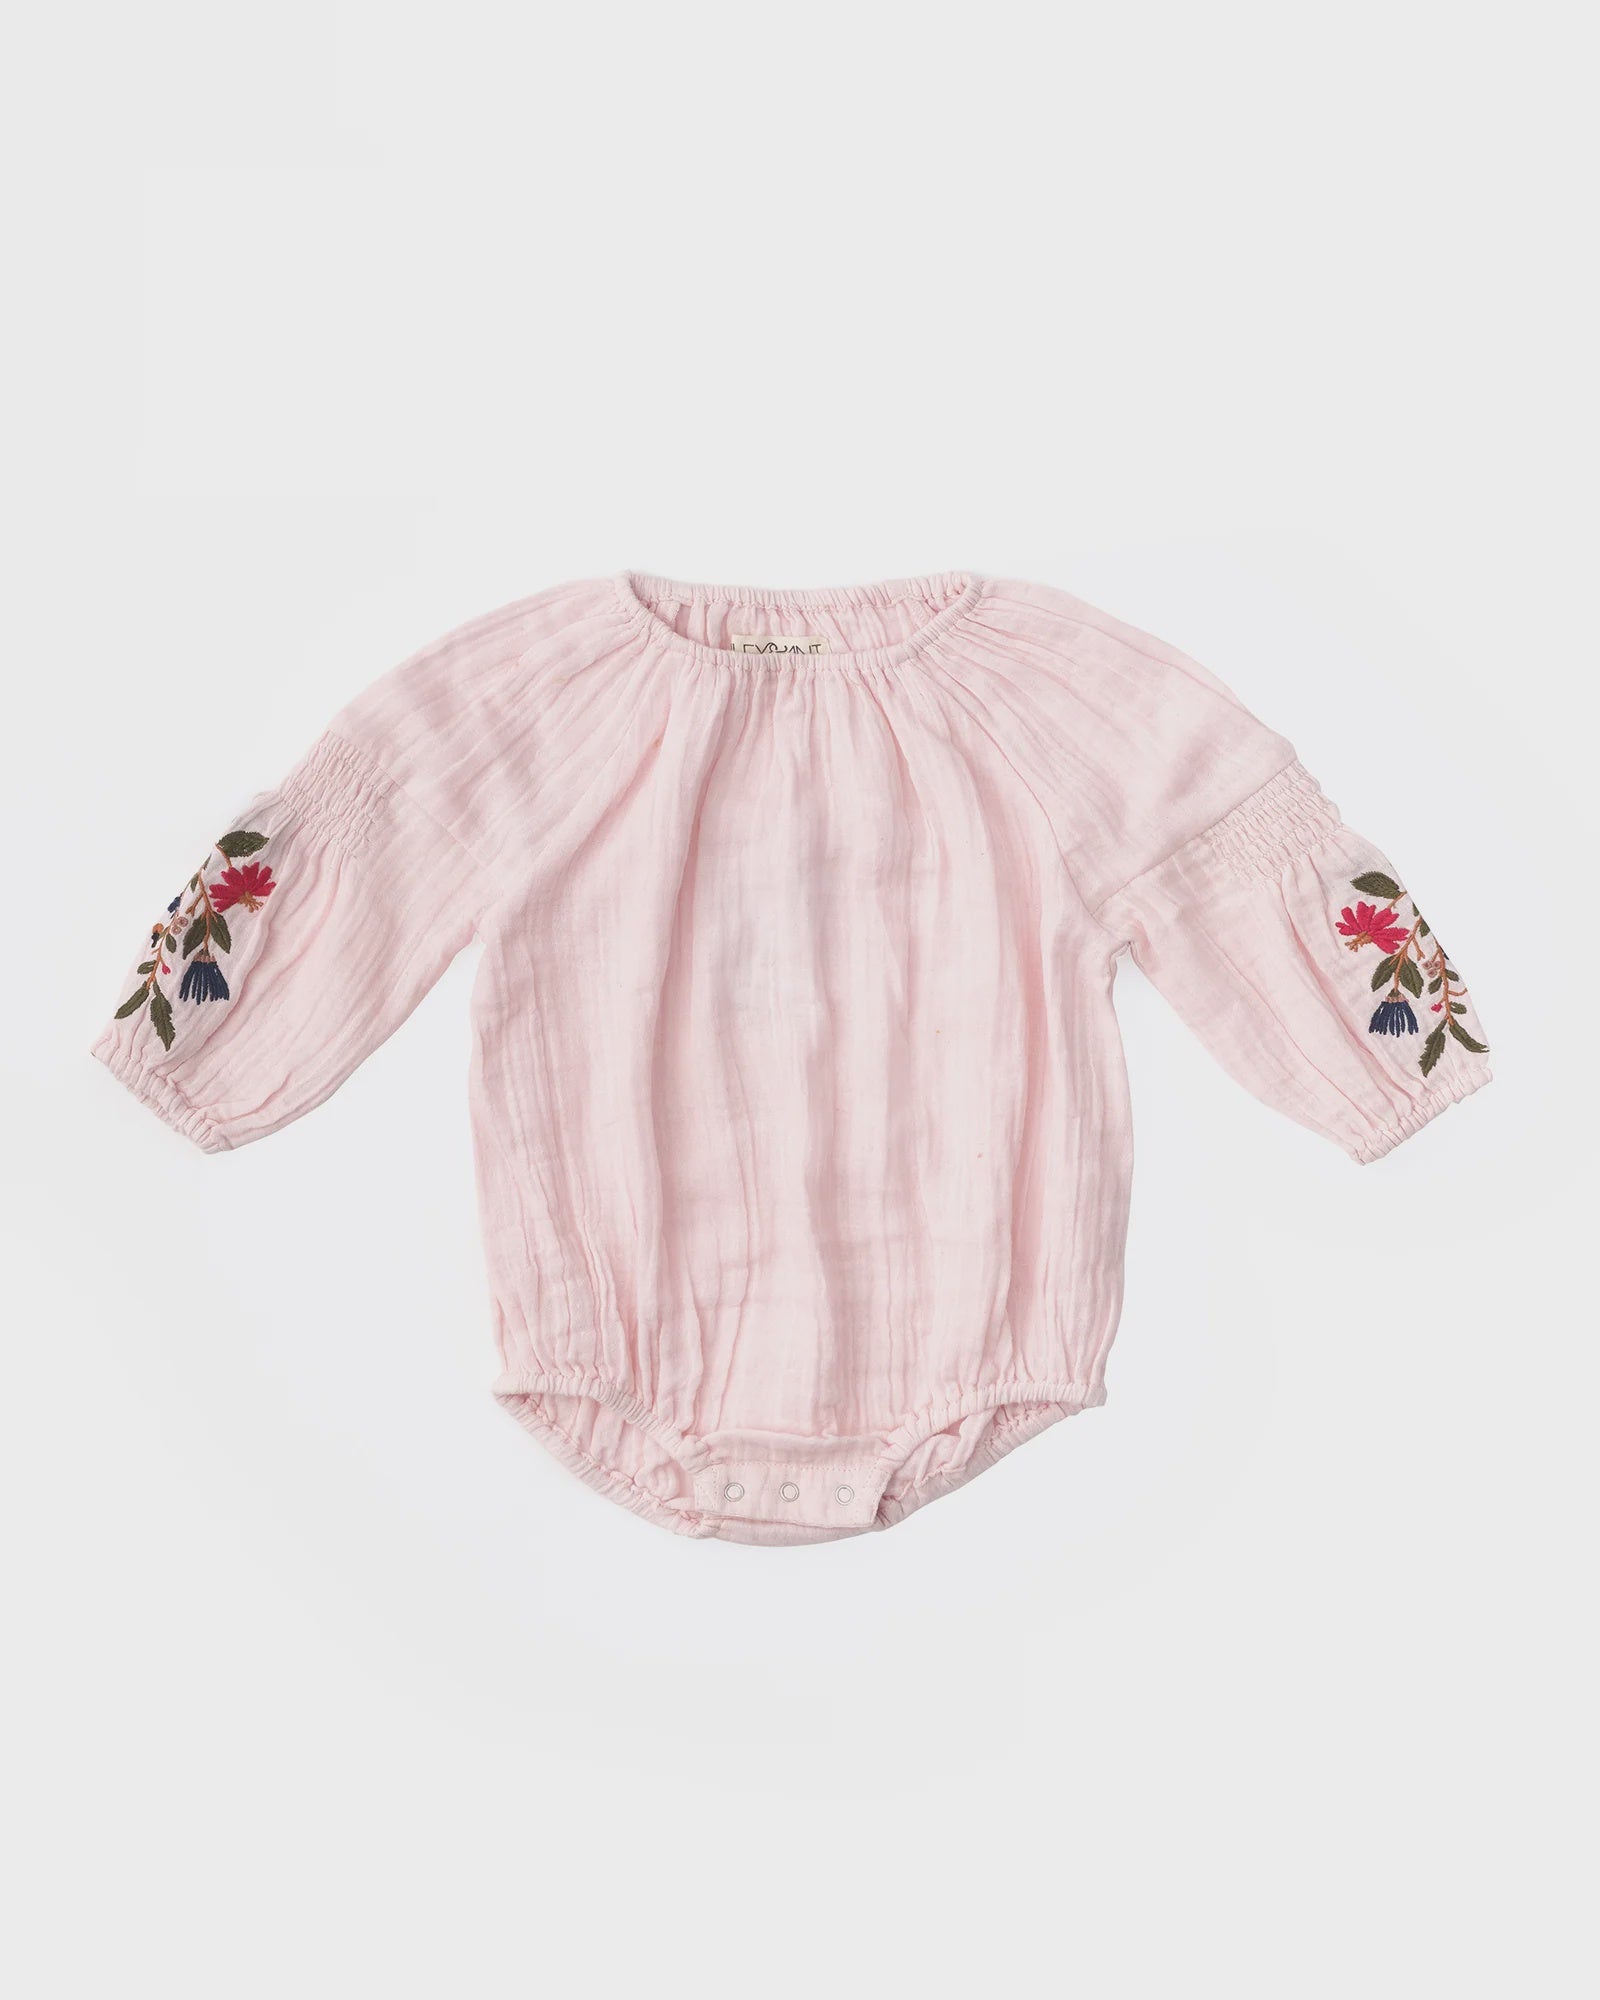 Alex and Ant Willow Playsuit - Baby Pink